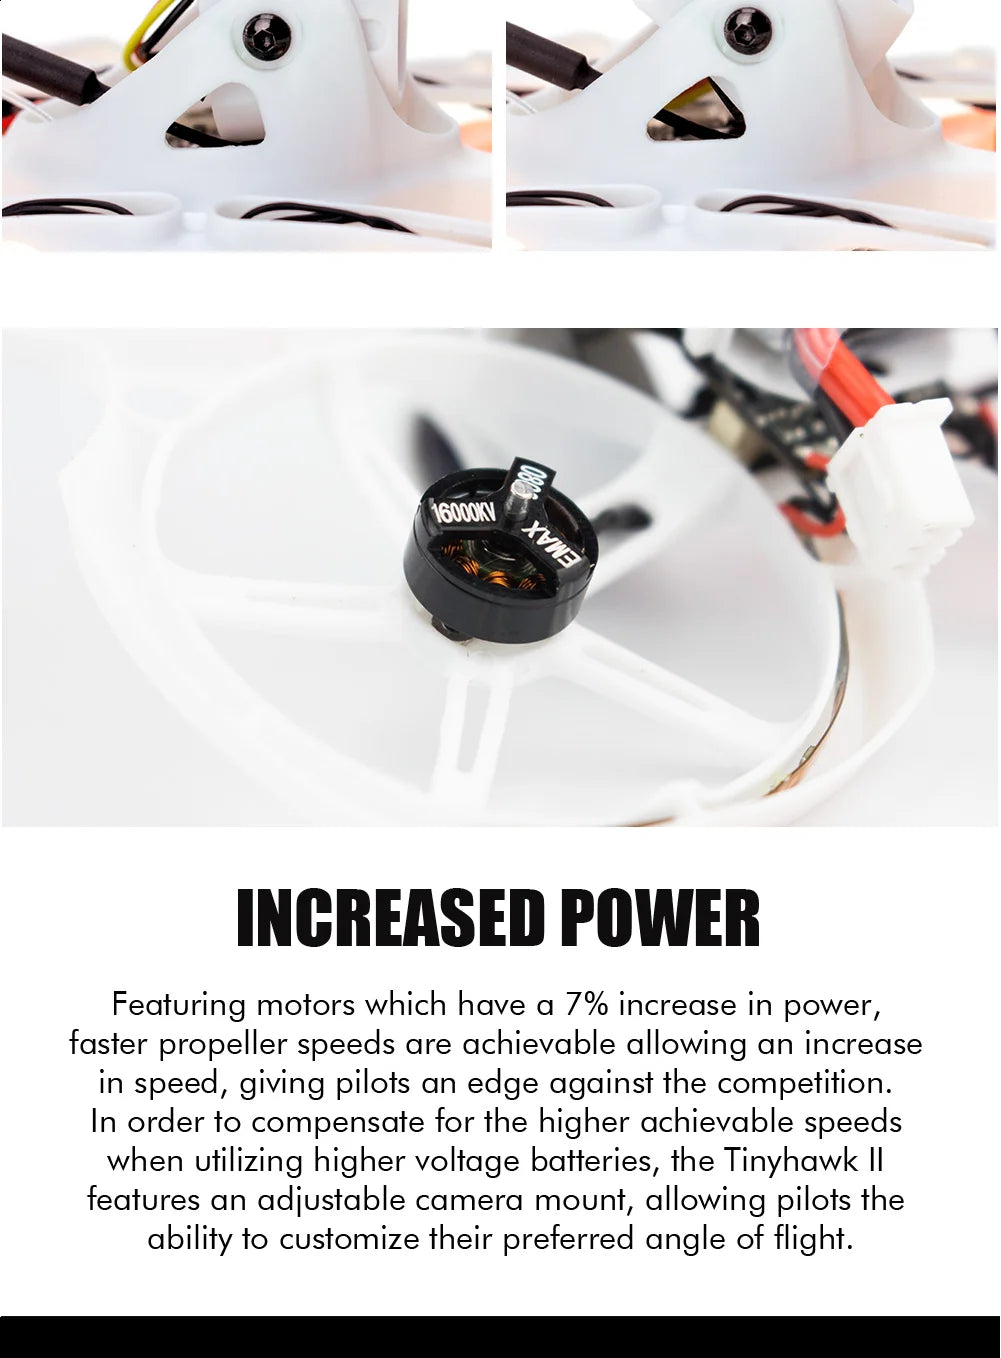 Emax Tinyhawk II 2 RTF - FPV, I6oonXv INCREASED POWER Featuring motors which have 